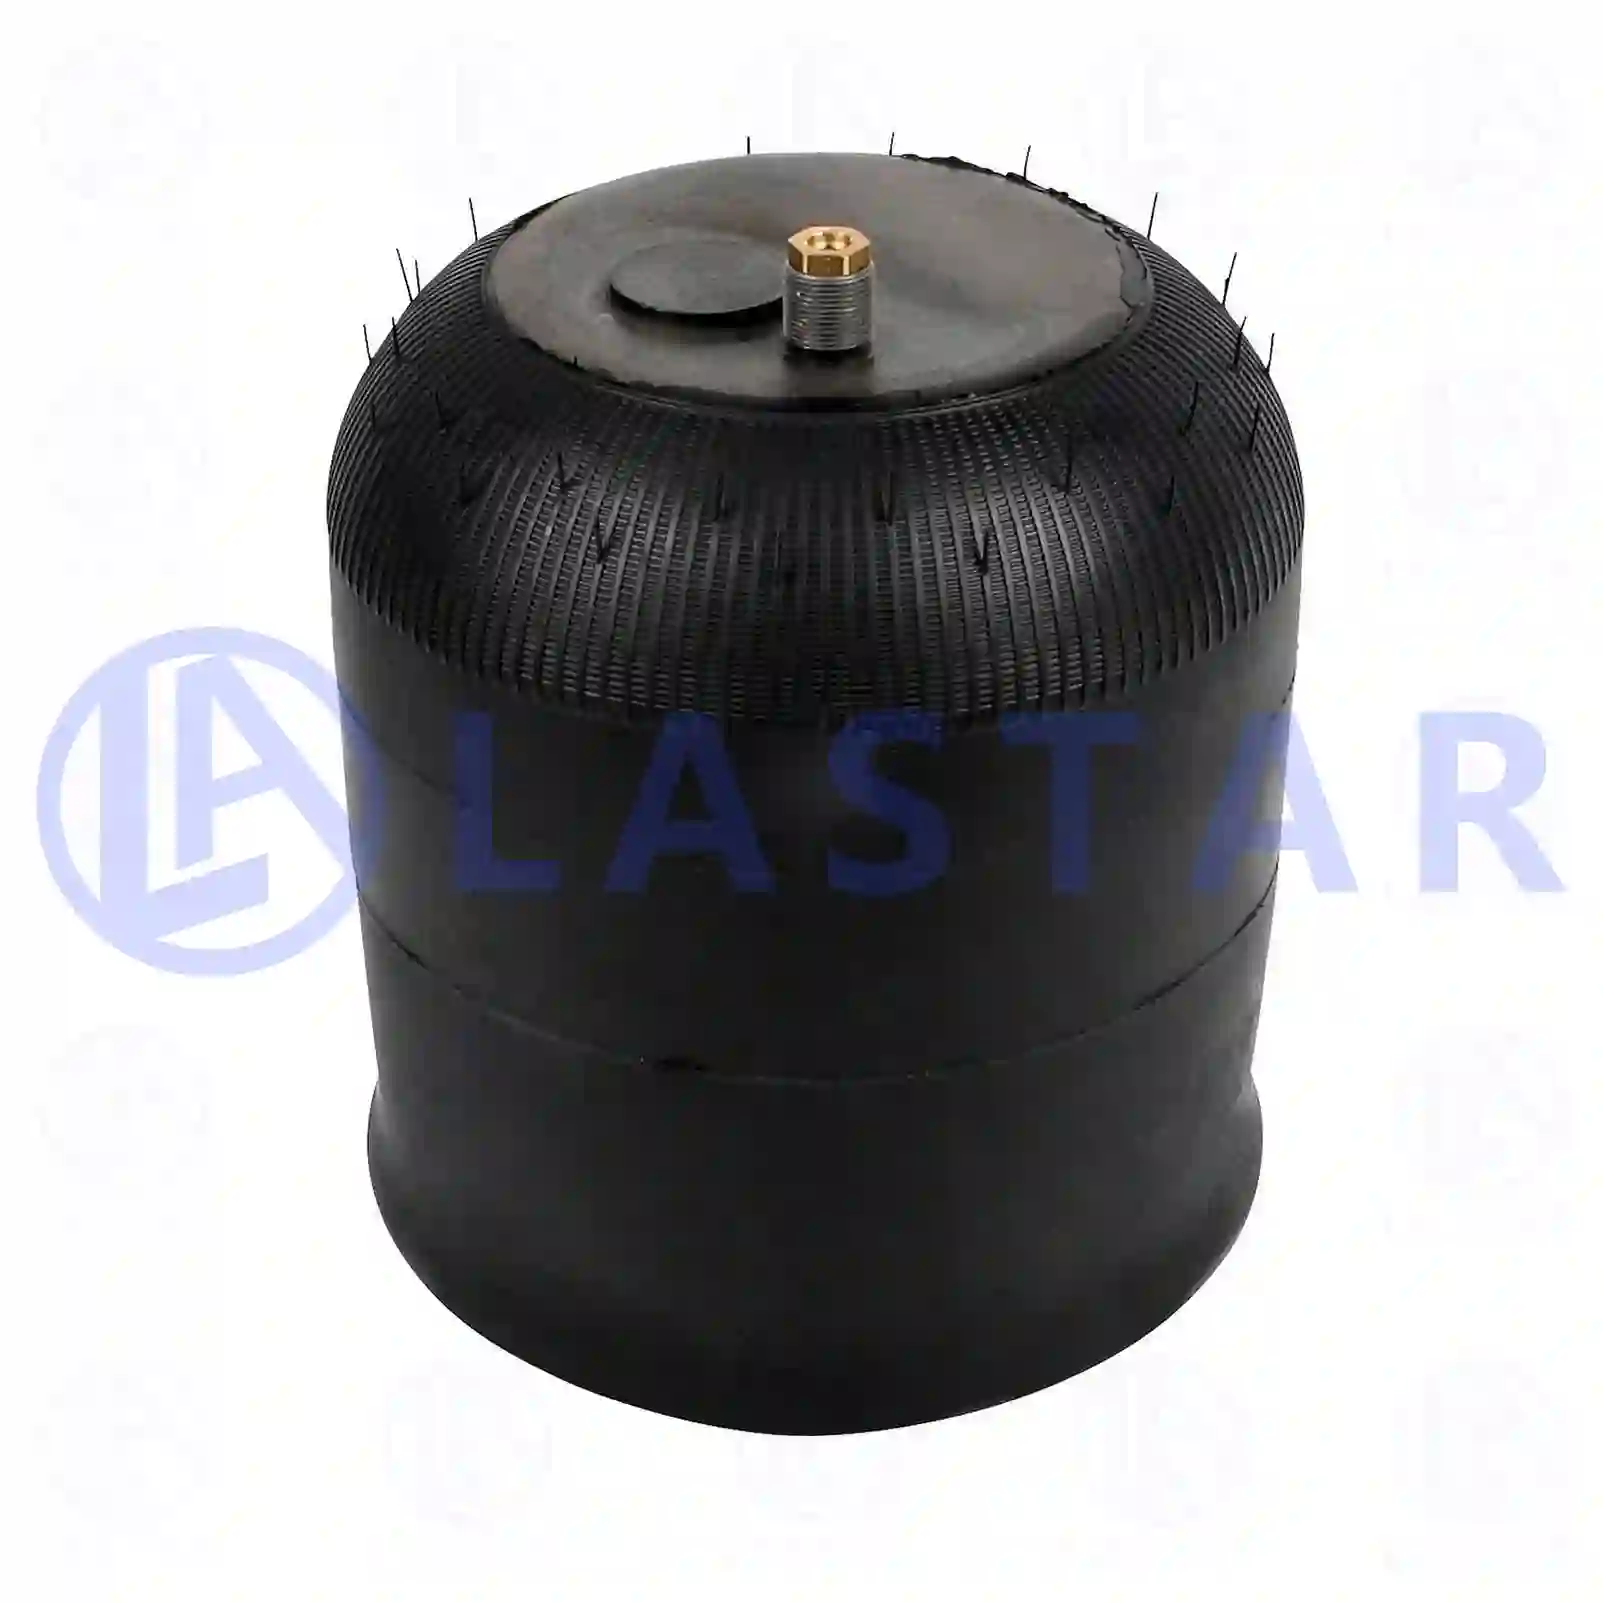 Air spring, with steel piston, 77727144, 9423203021, 9743200021, , ||  77727144 Lastar Spare Part | Truck Spare Parts, Auotomotive Spare Parts Air spring, with steel piston, 77727144, 9423203021, 9743200021, , ||  77727144 Lastar Spare Part | Truck Spare Parts, Auotomotive Spare Parts